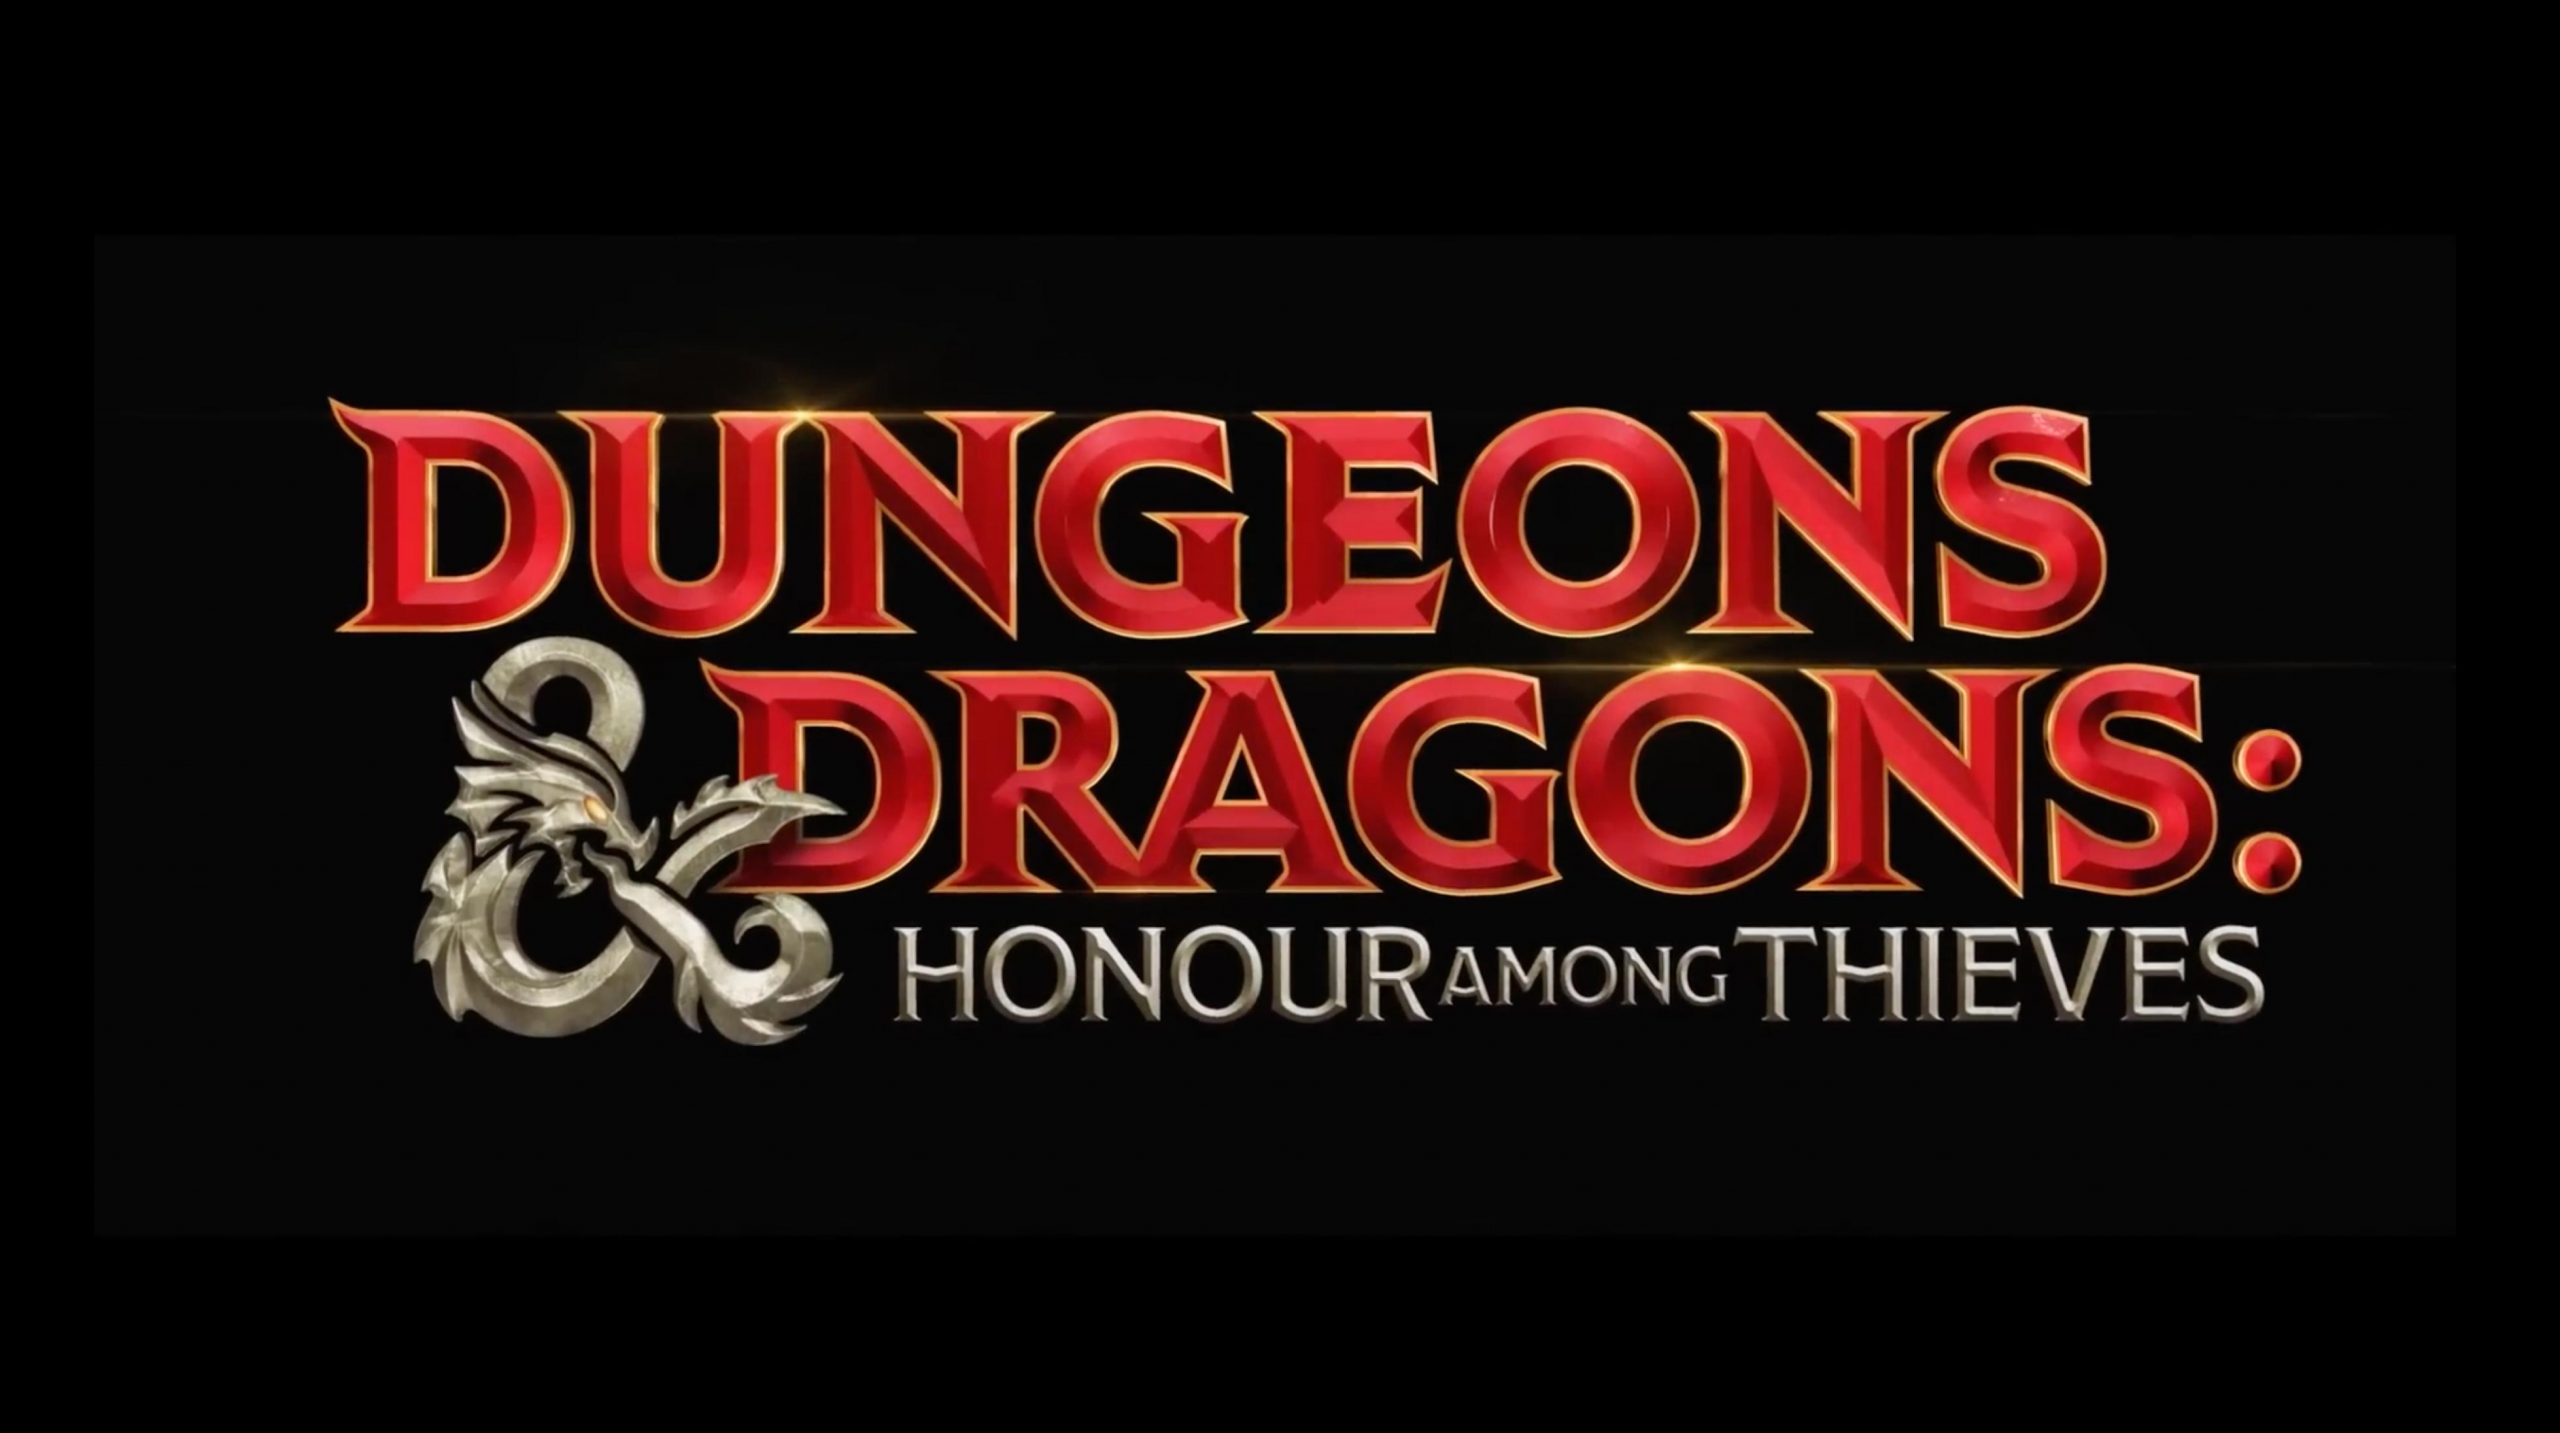 Dungeons and Dragons: Honour Among Thieves Movie Title